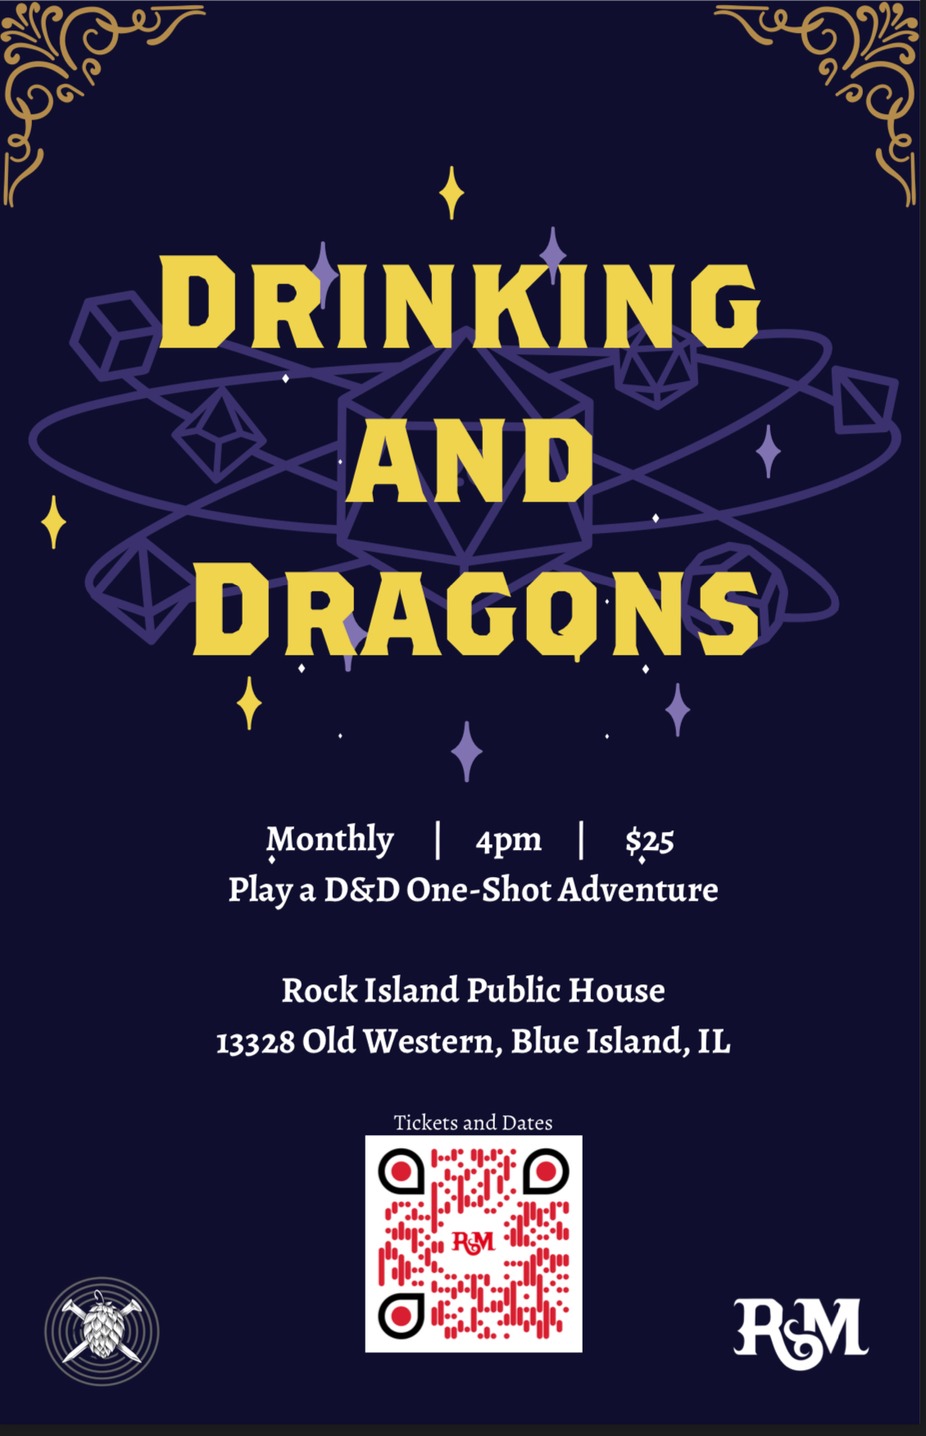 Drinking and Dragons event photo